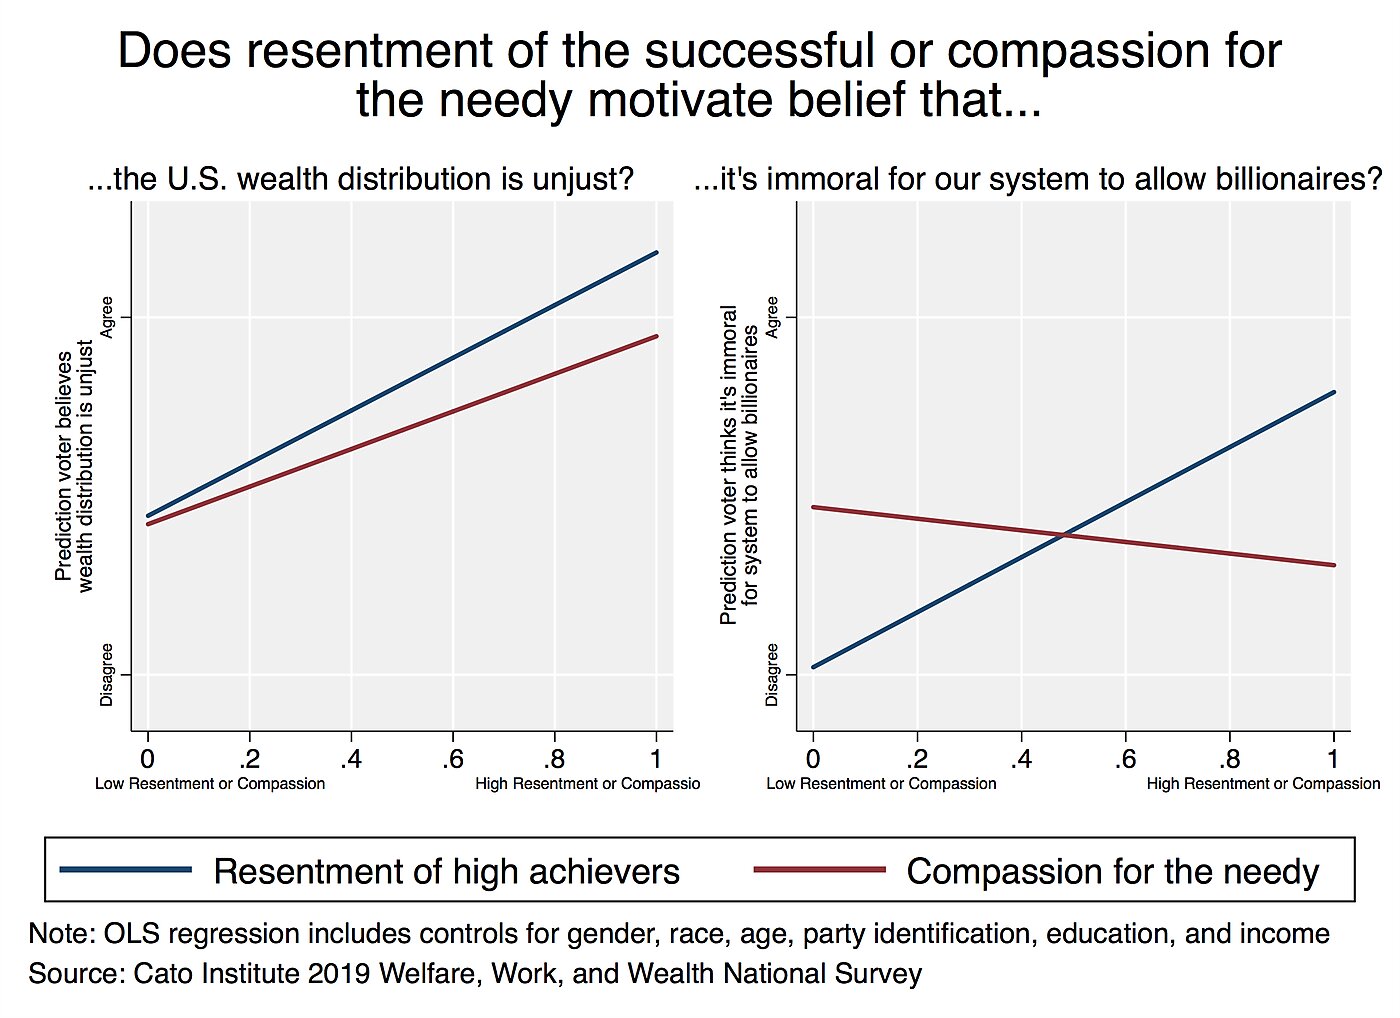 Does resentment of successful or compassion for needy motivate belief that wealth distribution is unjust or billionaires are immoral?